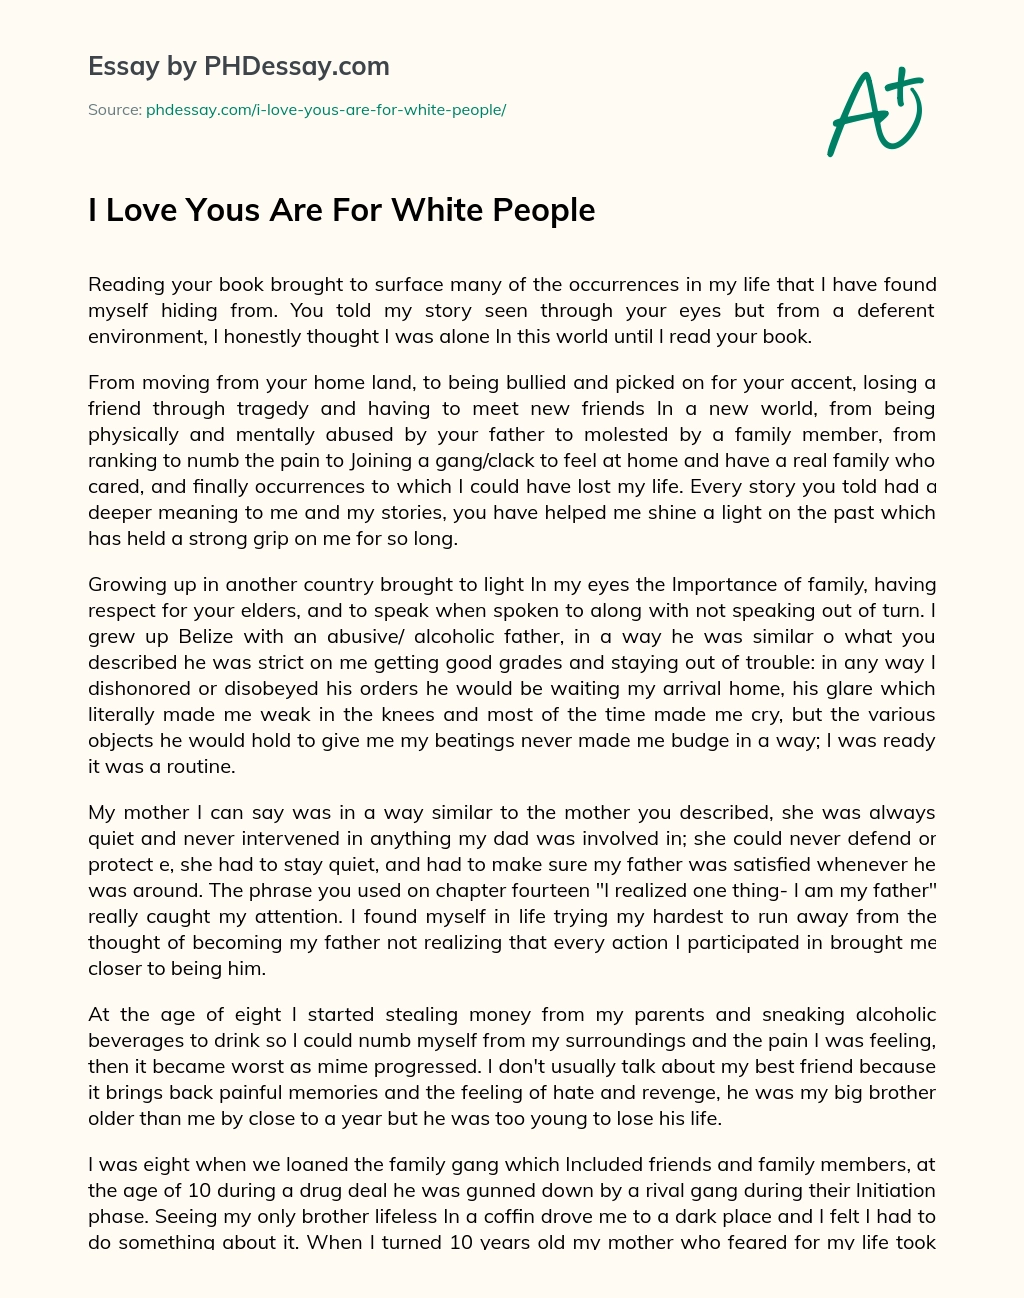 I Love Yous Are For White People essay